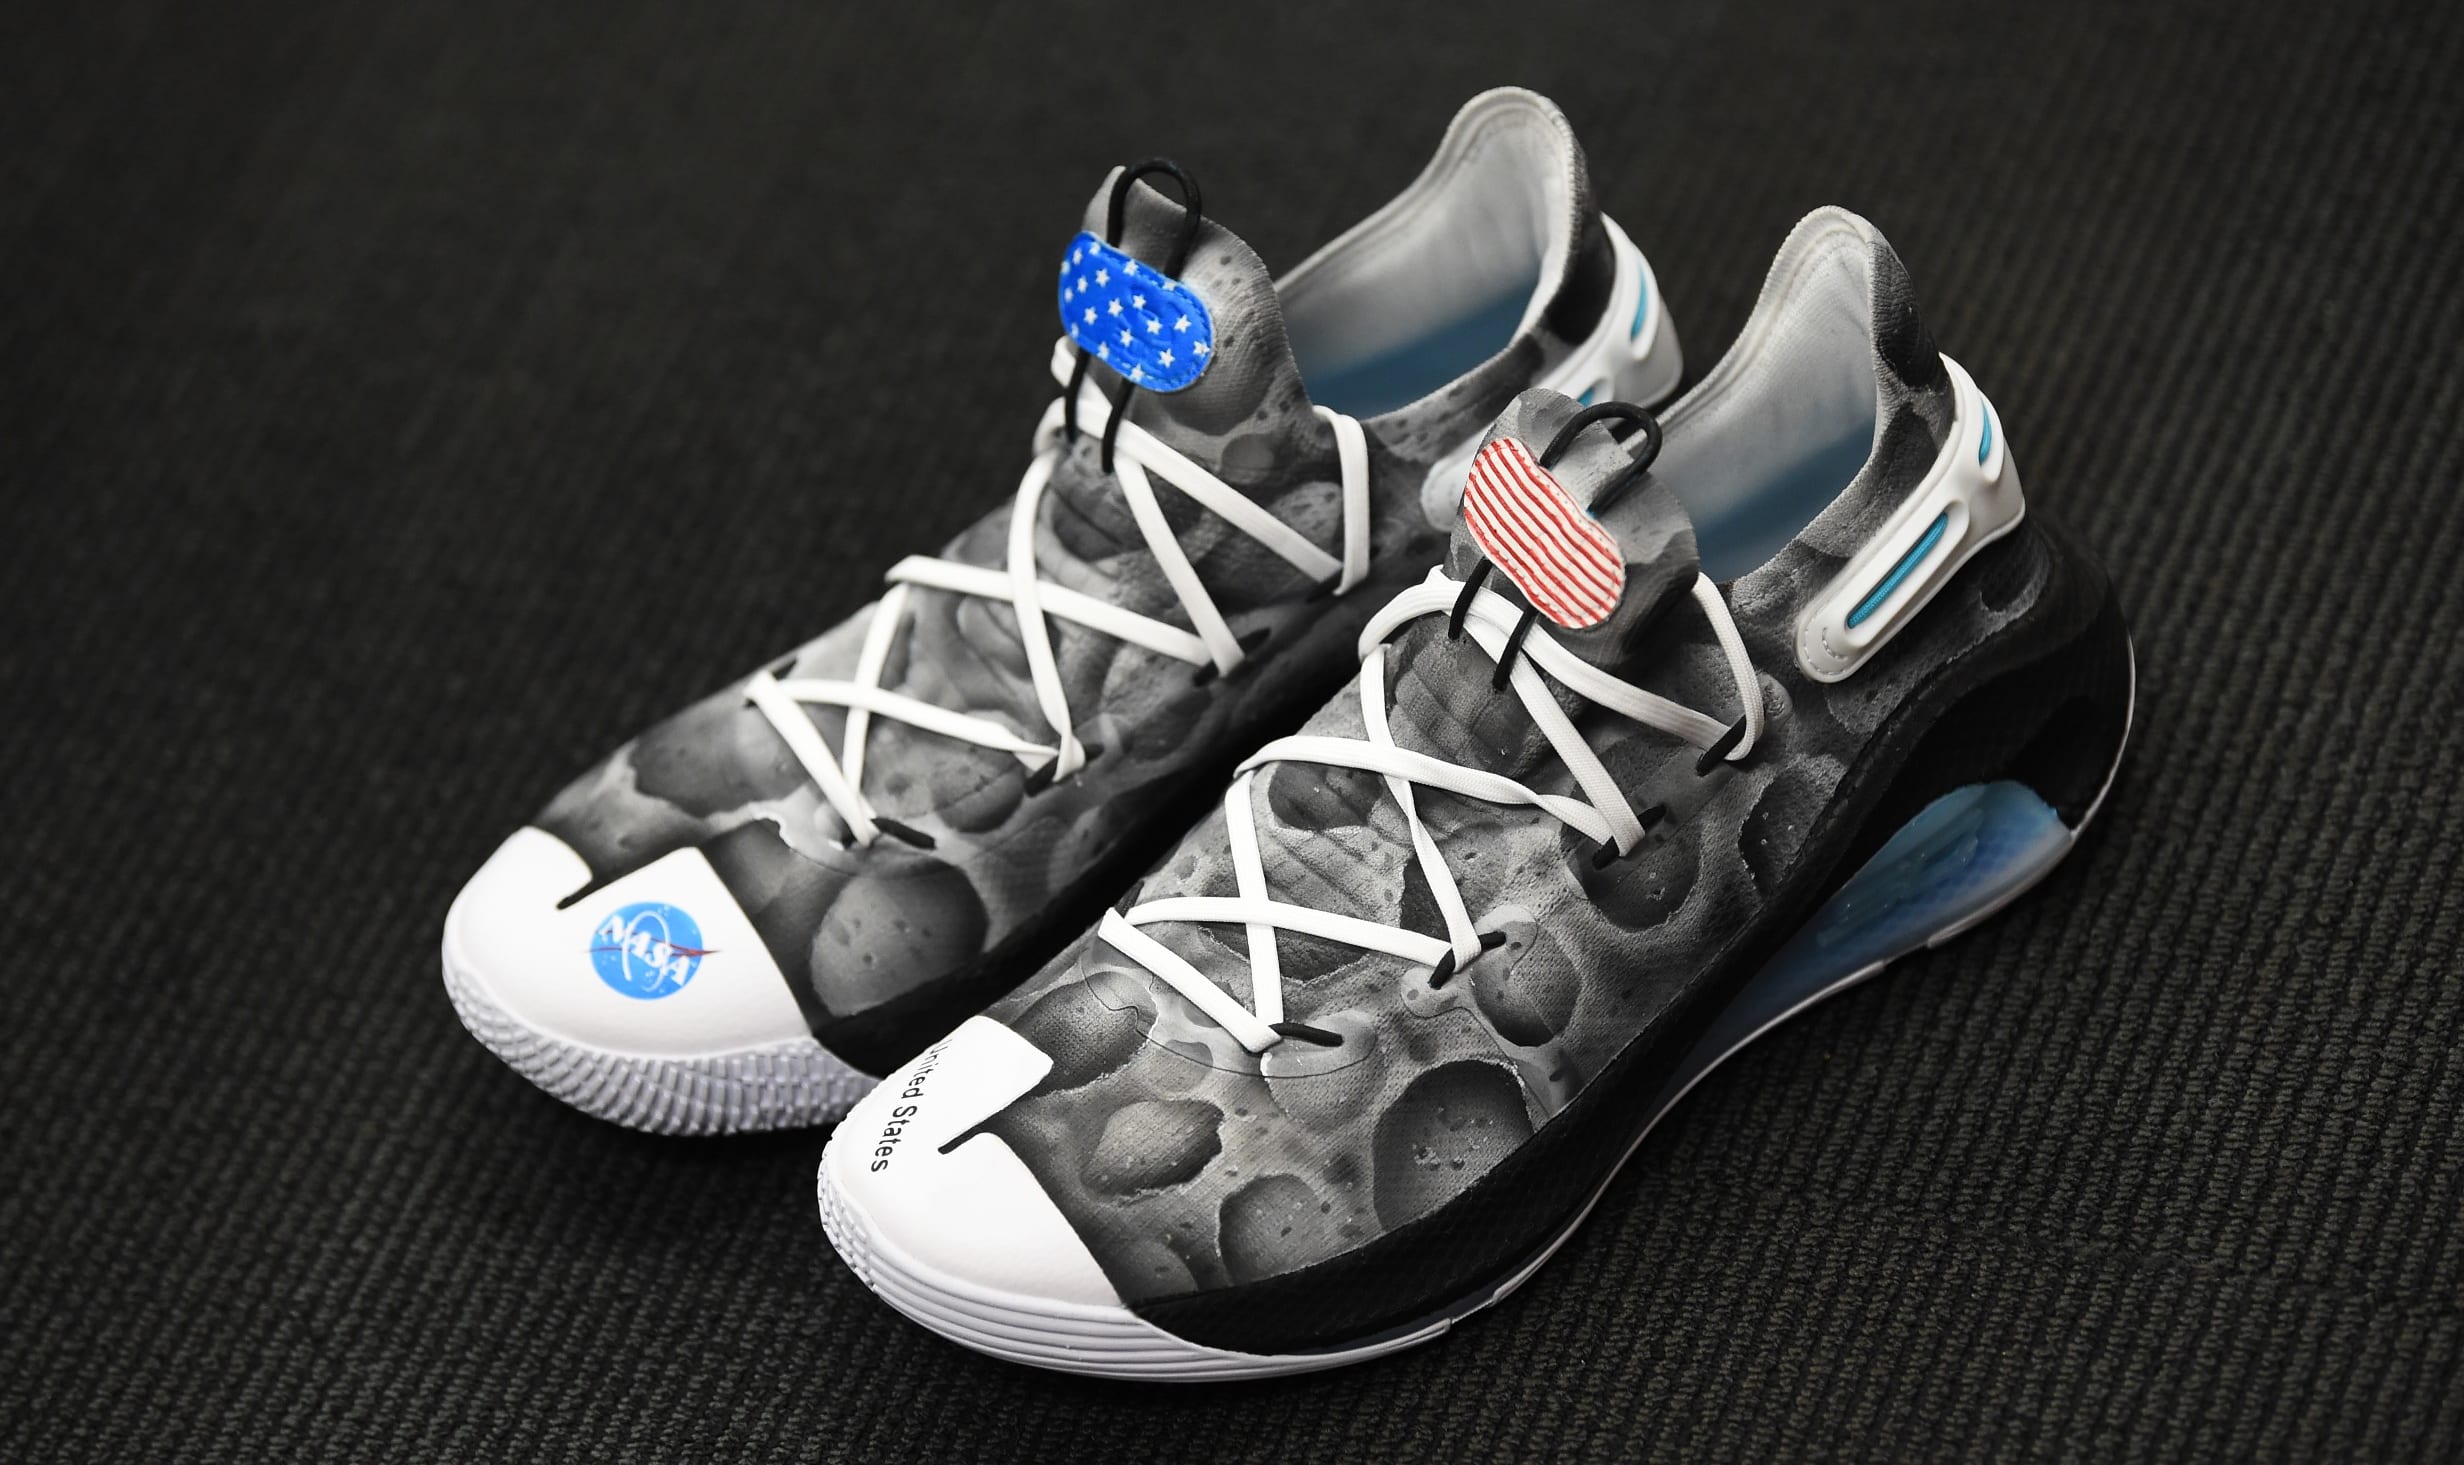 Chance Win Steph Curry's 'Moon Landing' Sneakers | Sole Collector